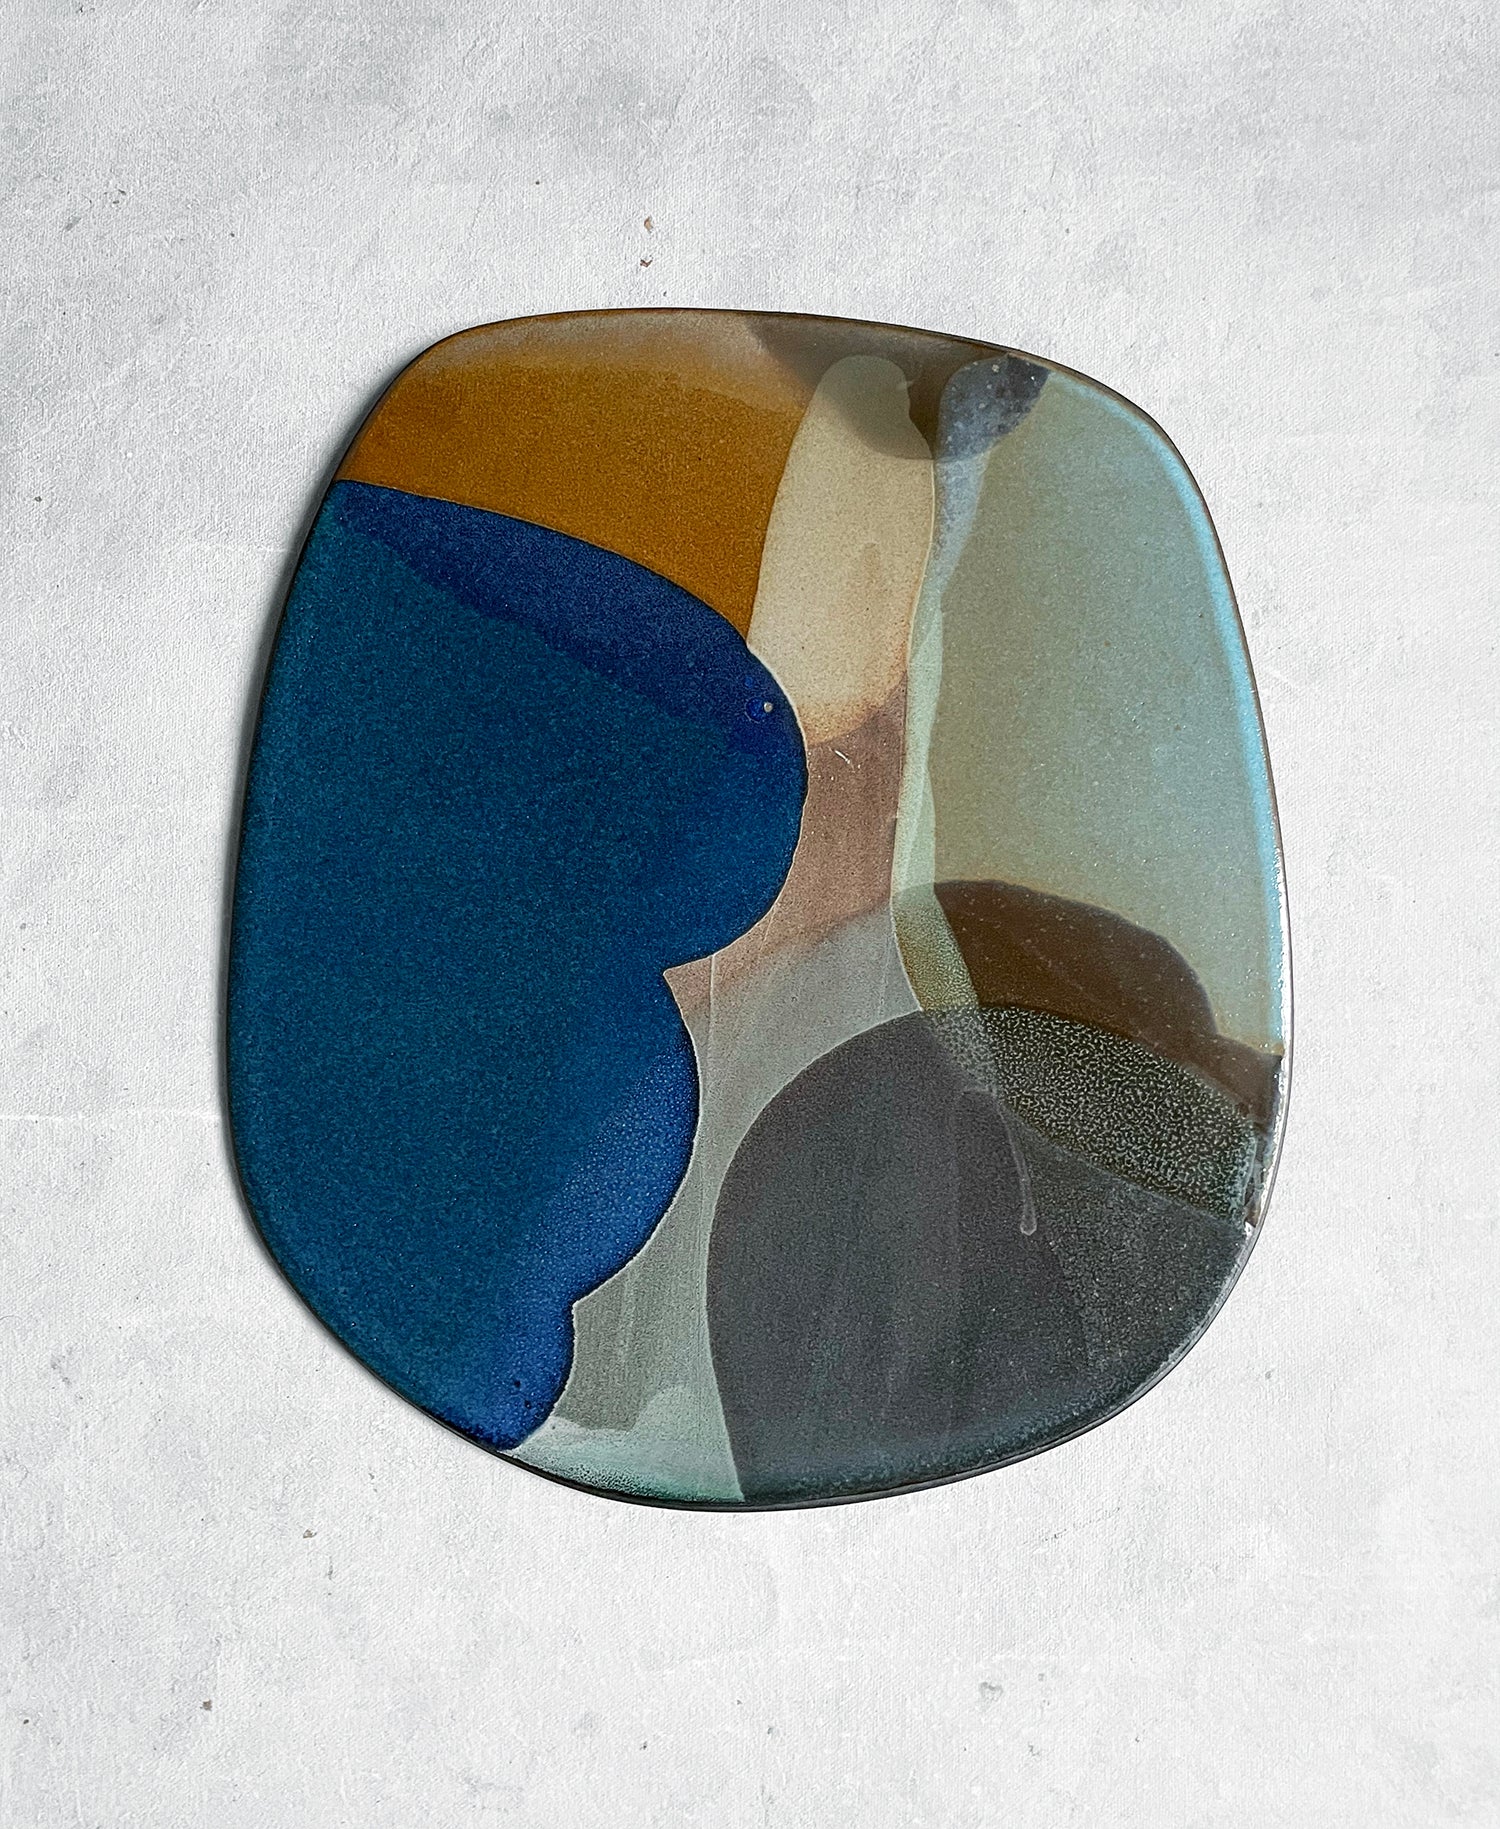 "Composition in Oval II"